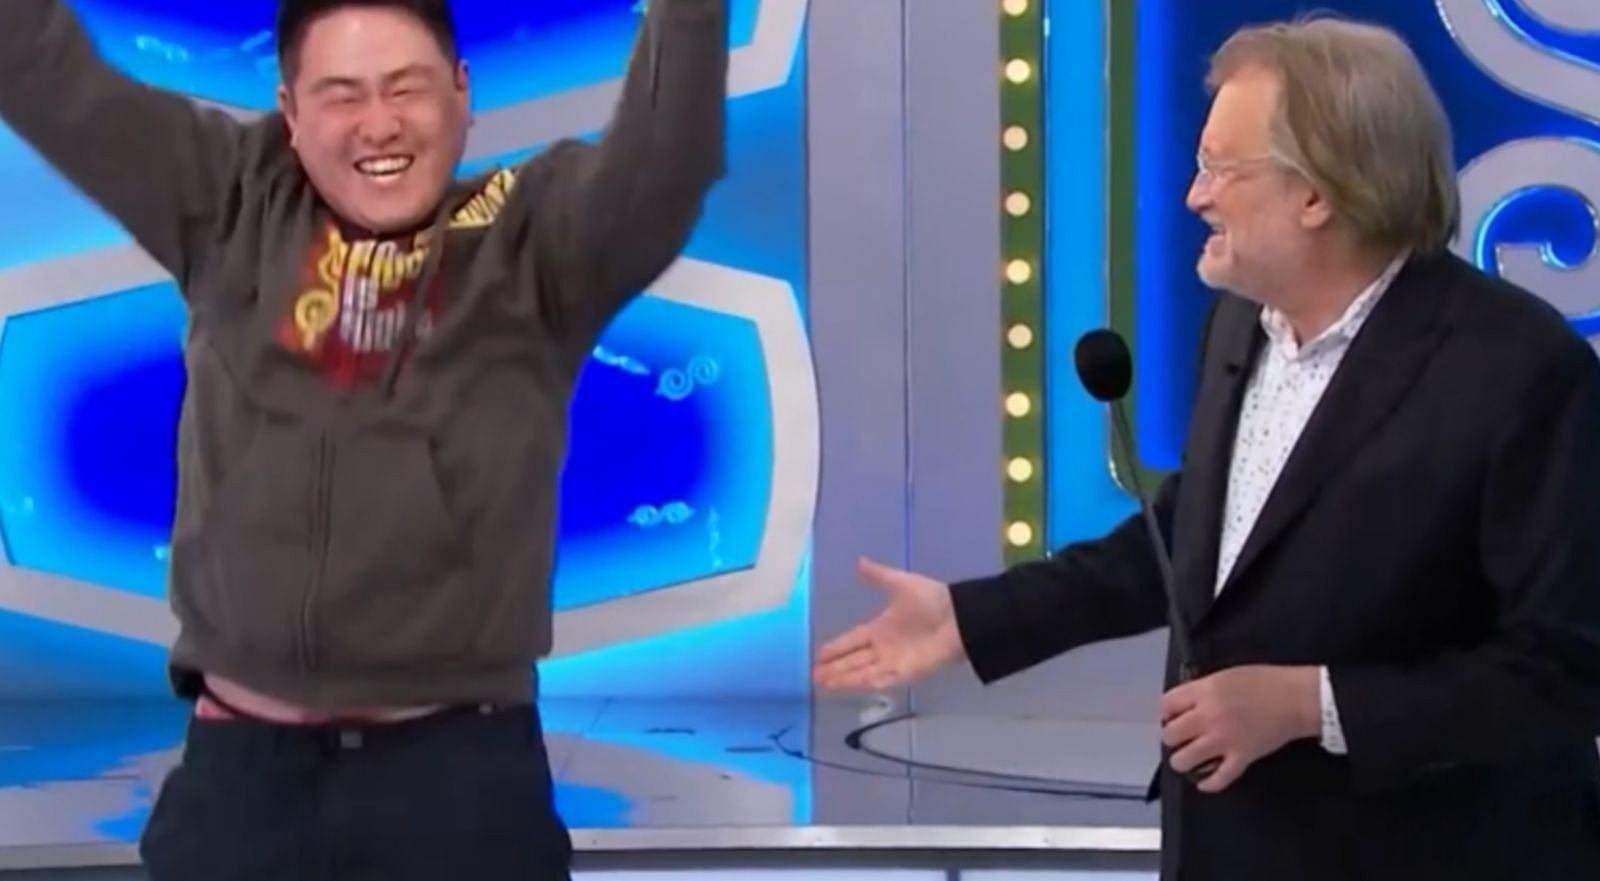 The Price Is Right contestant Henry and the show host Drew (image via The Price Is Right)